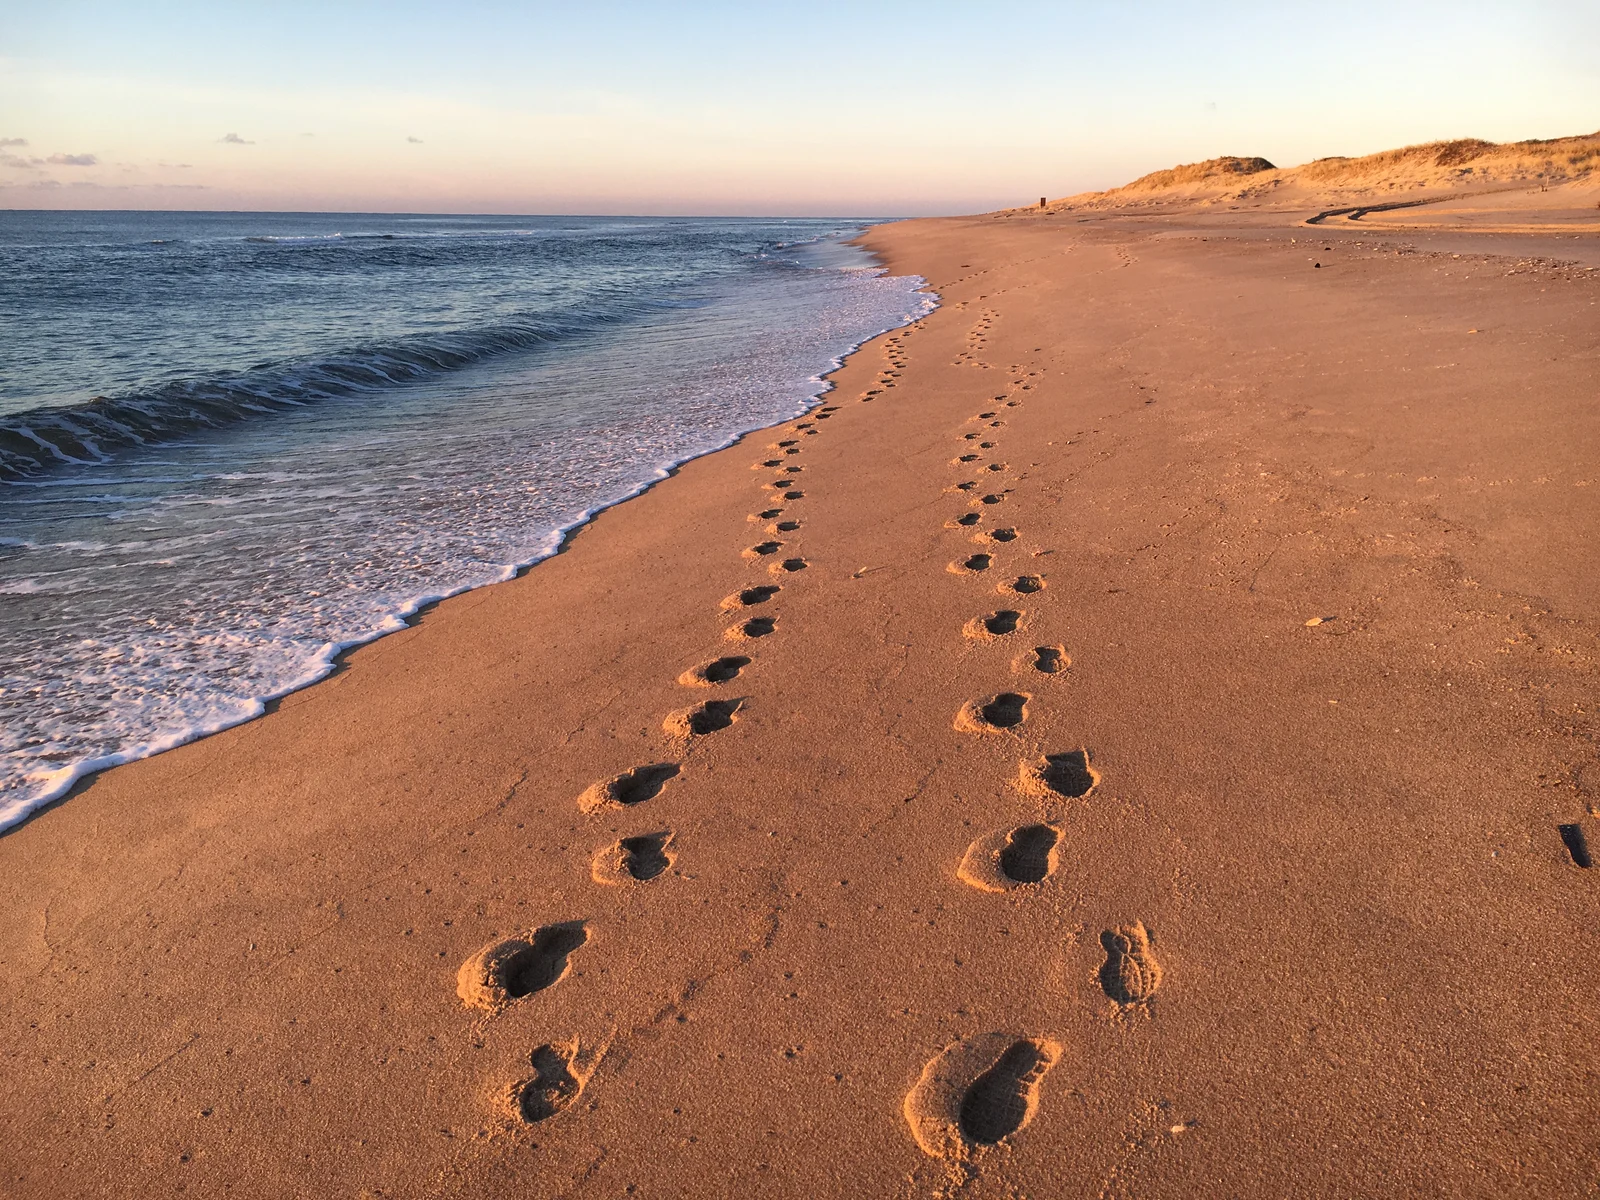 Footprints on a beach in Amagansett, one of our top picks for where to stay in the Hamptons